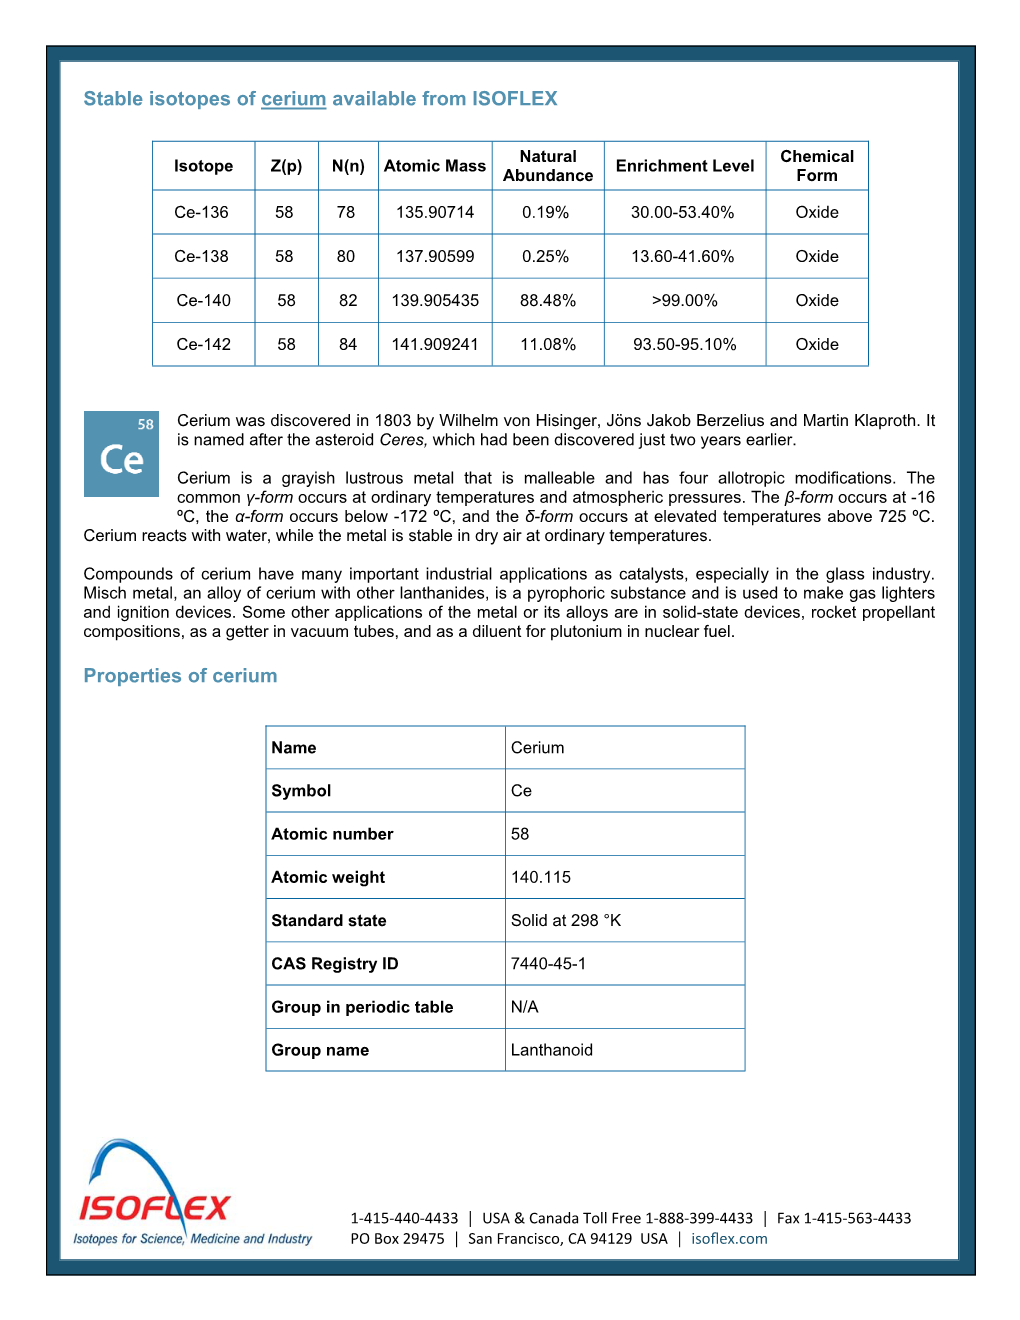 Stable Isotopes of Cerium Available from ISOFLEX Properties of Cerium